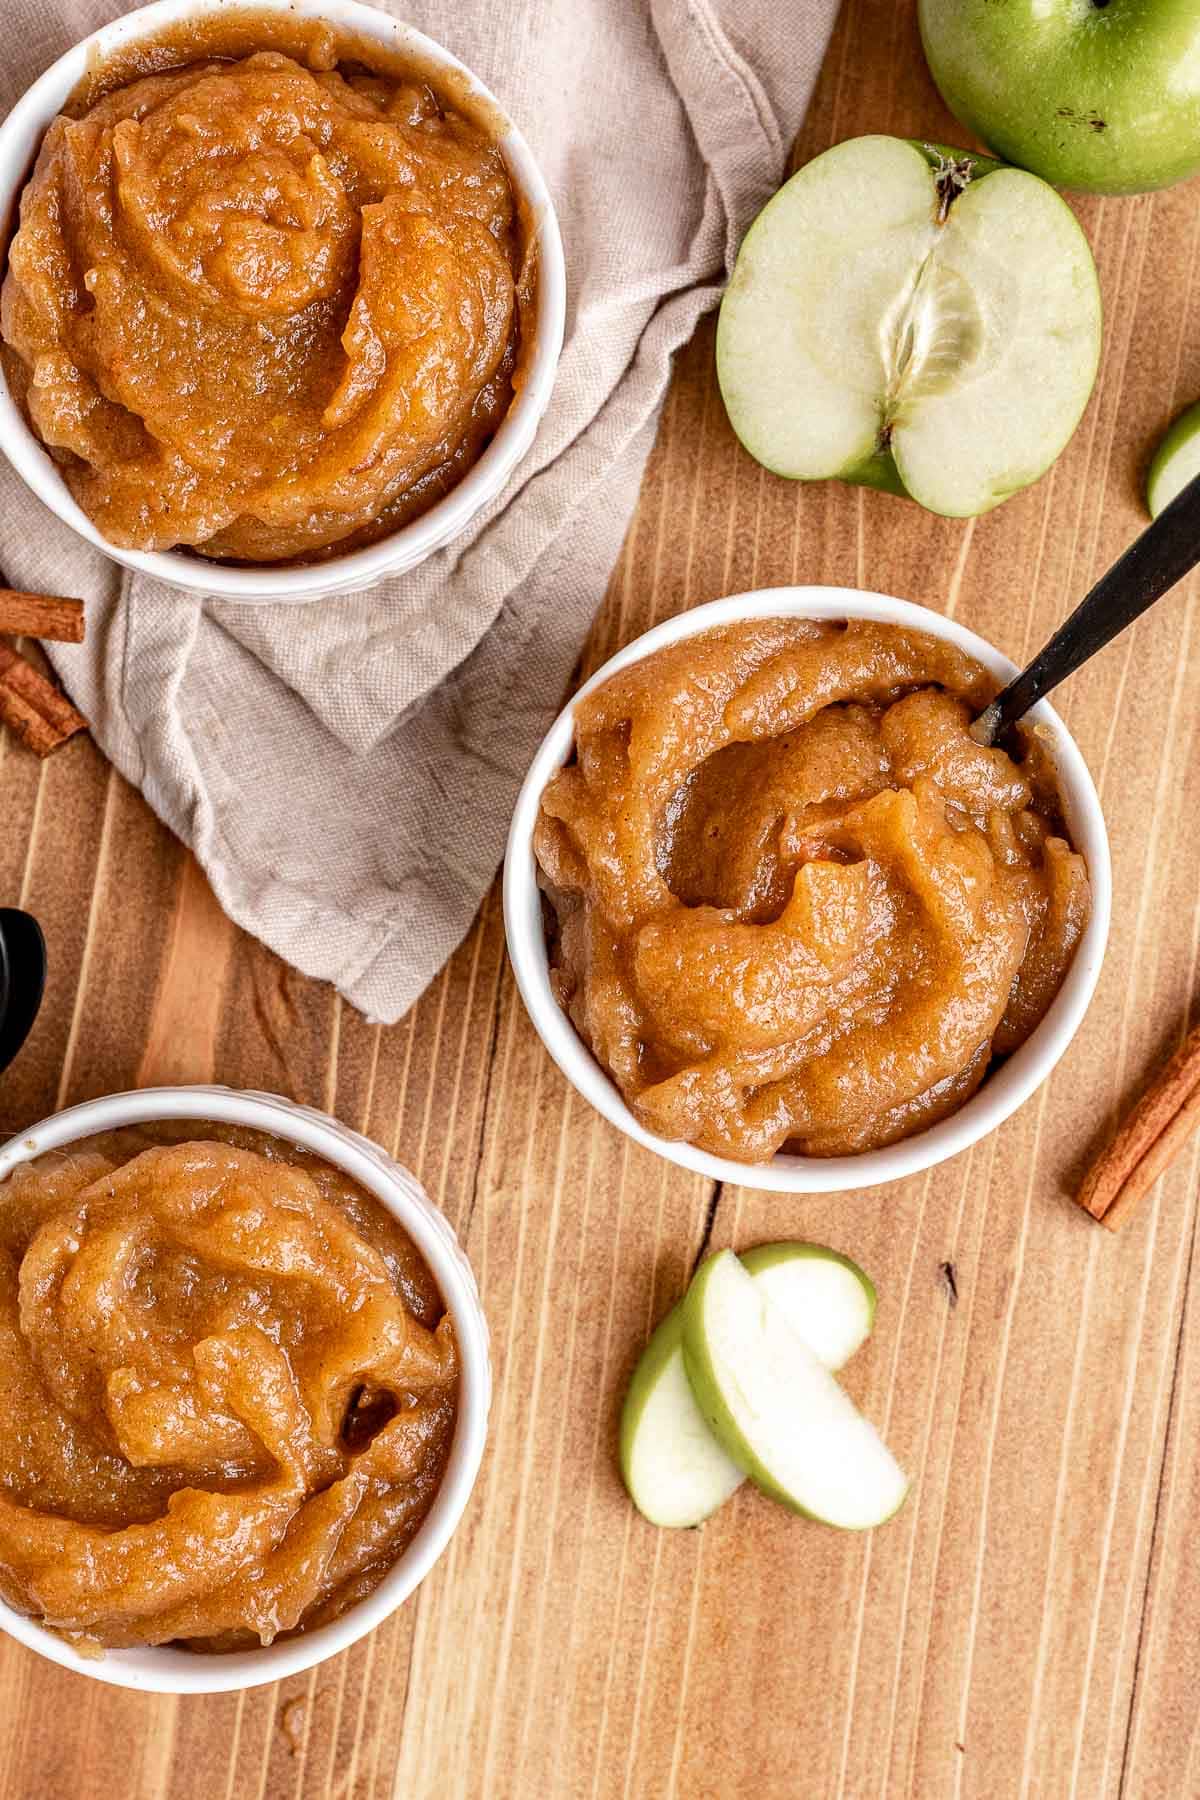 Baked Applesauce in White Bowls with Spoon